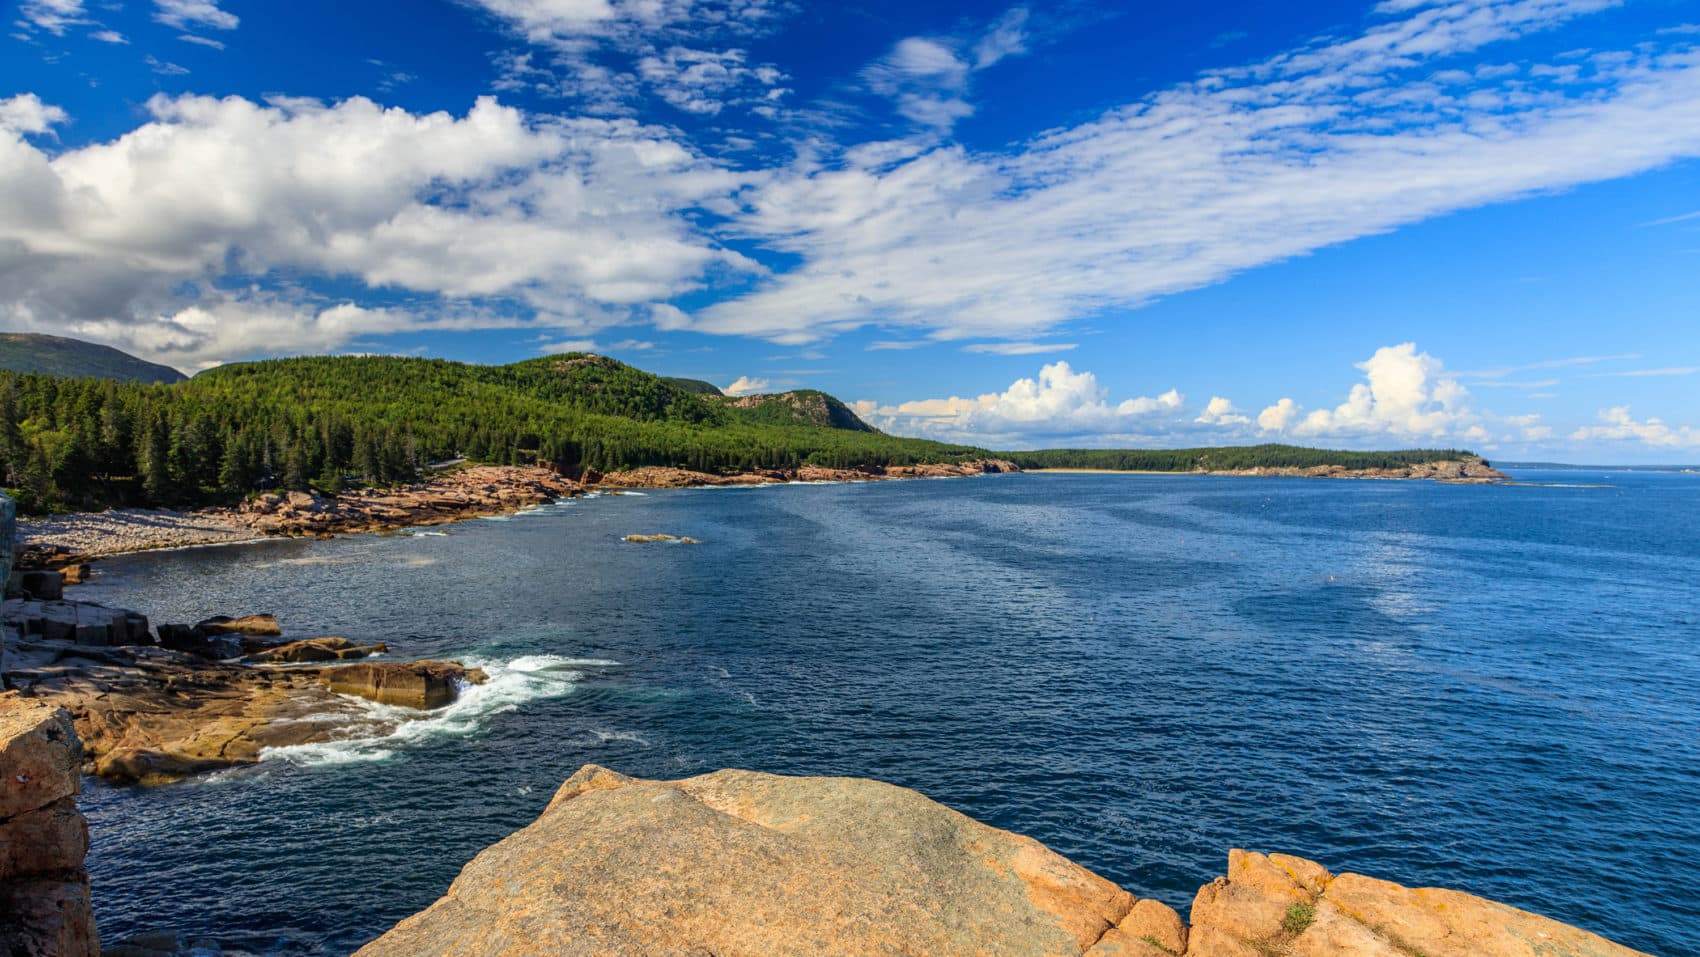 The coast of Acadia National Park as seen along the Ocean Drive section of Park Loop Road. (Kristi Rugg/NPS)